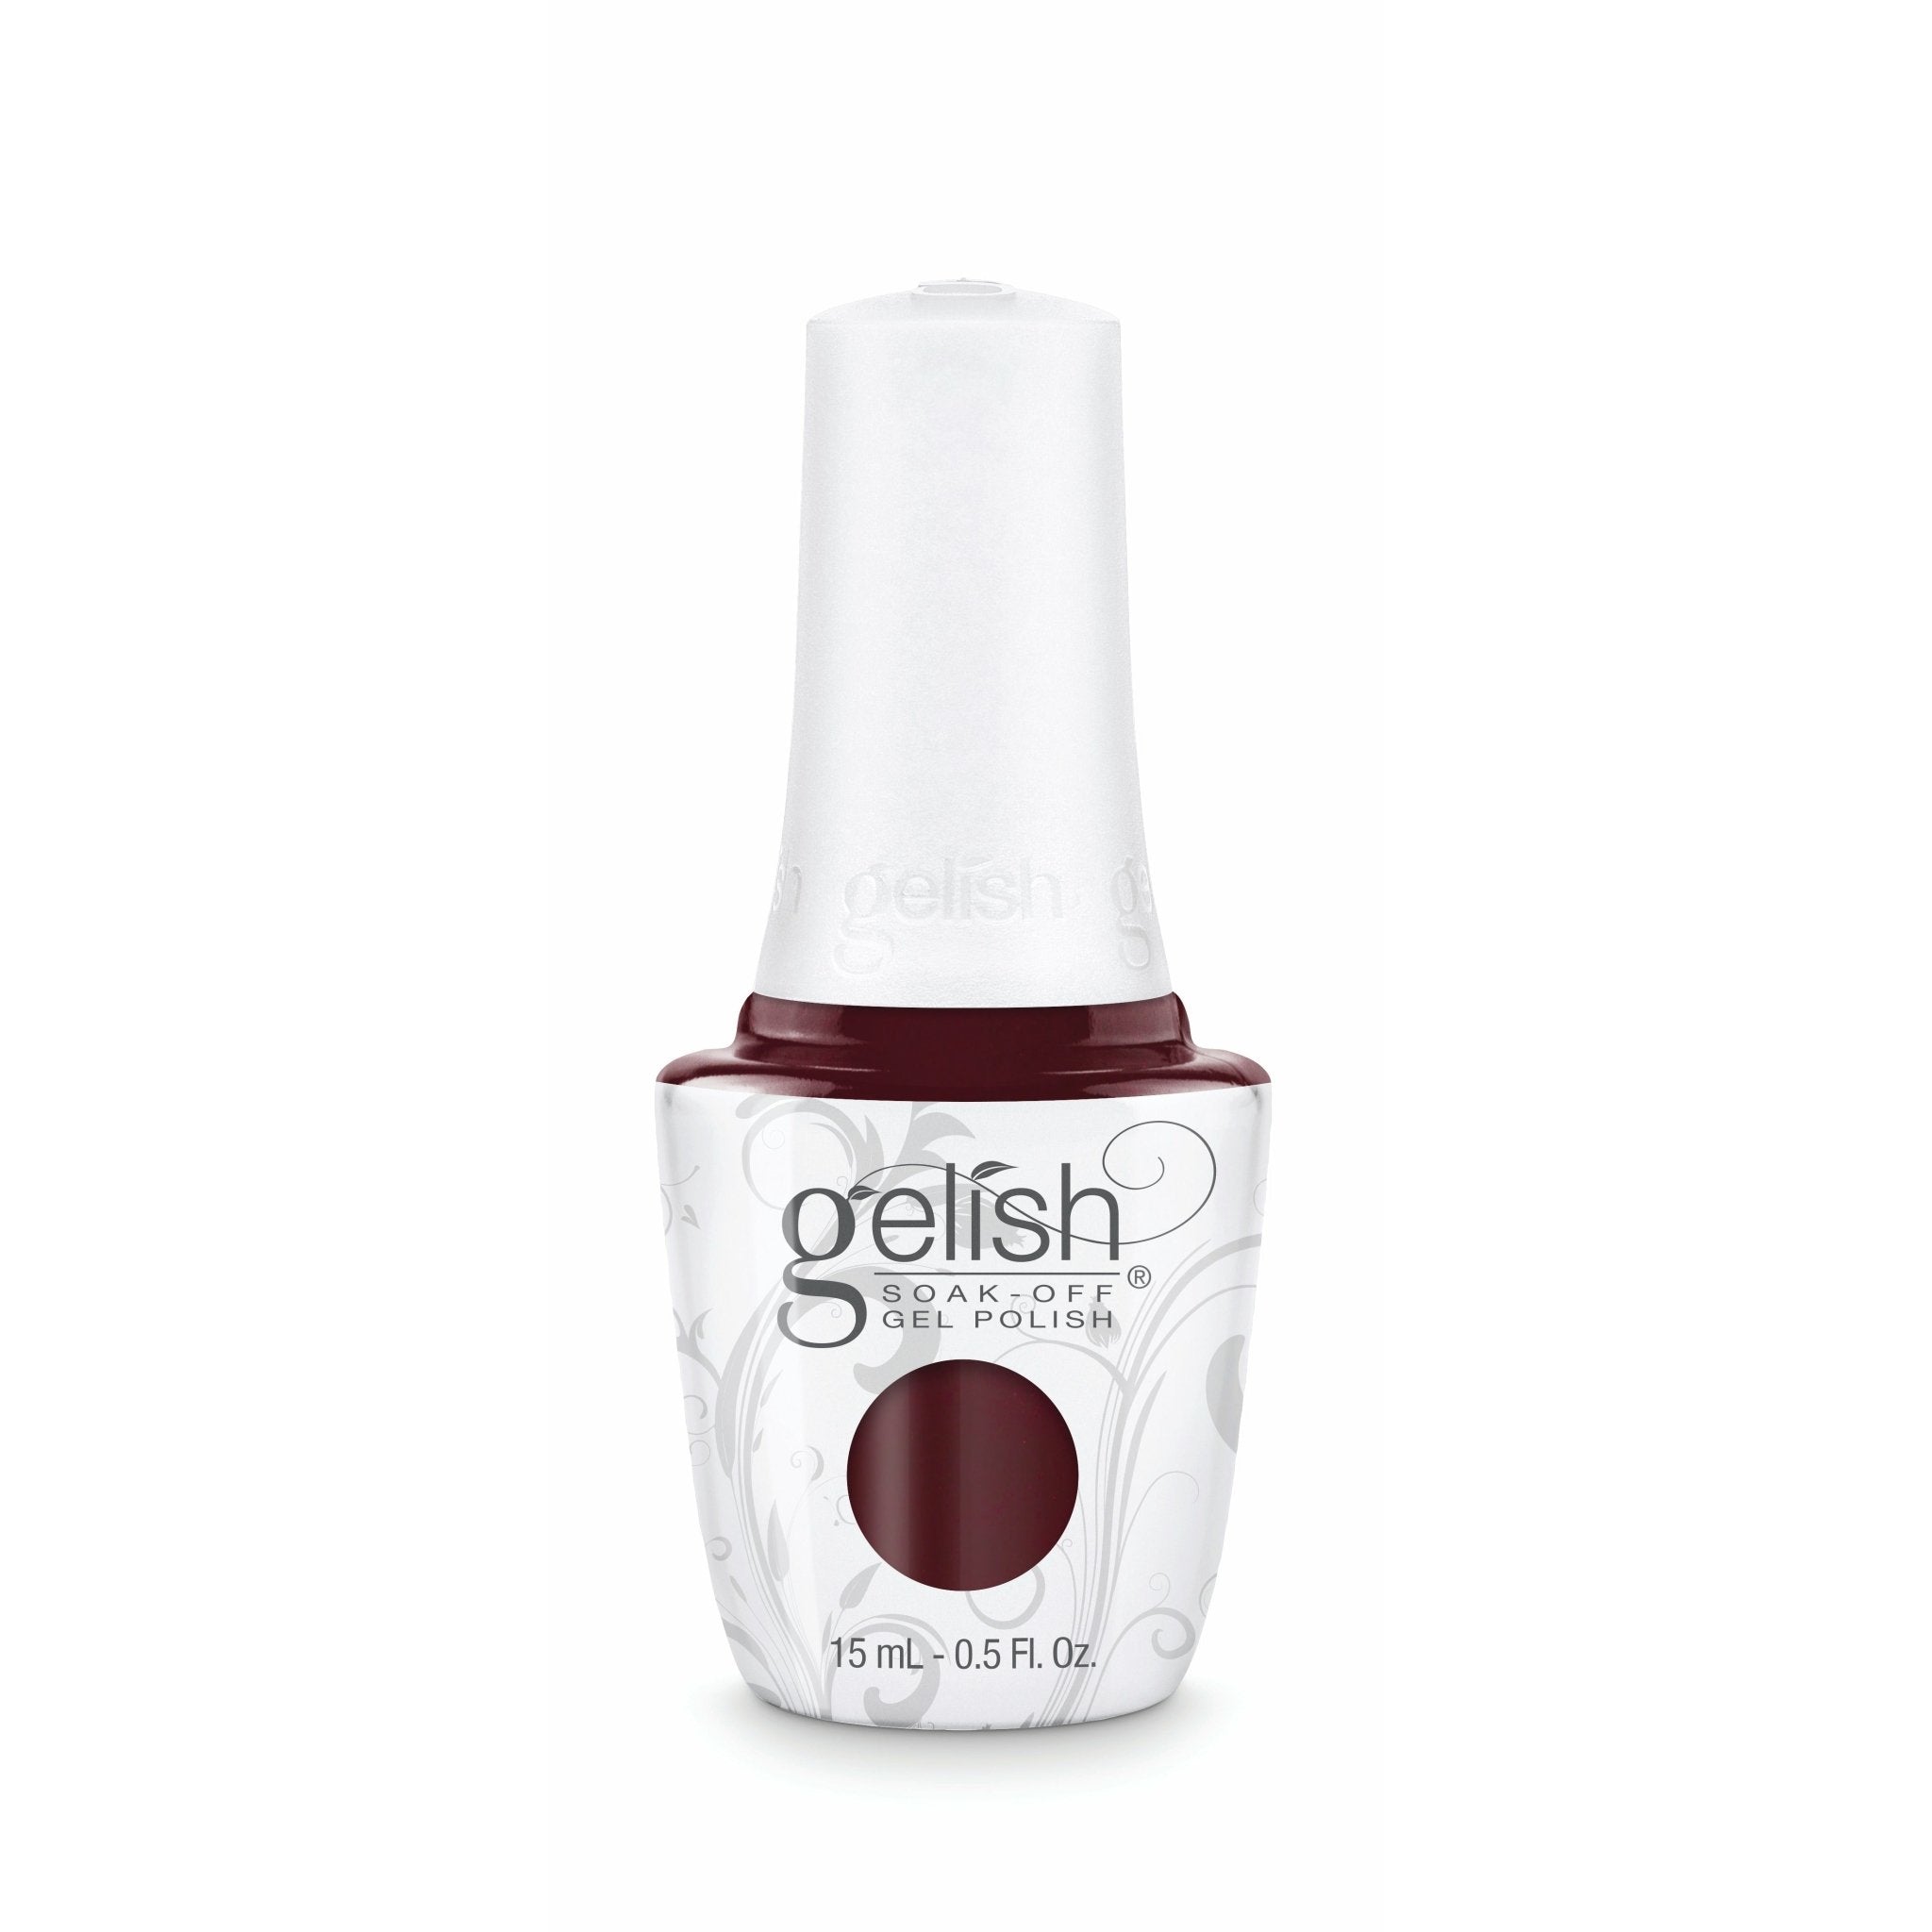 HARMONY GELISH Gel Polish 1110191-1100000 A Little Naughty AFTER HOURS 15 ML - IZZAT DAOUK SA